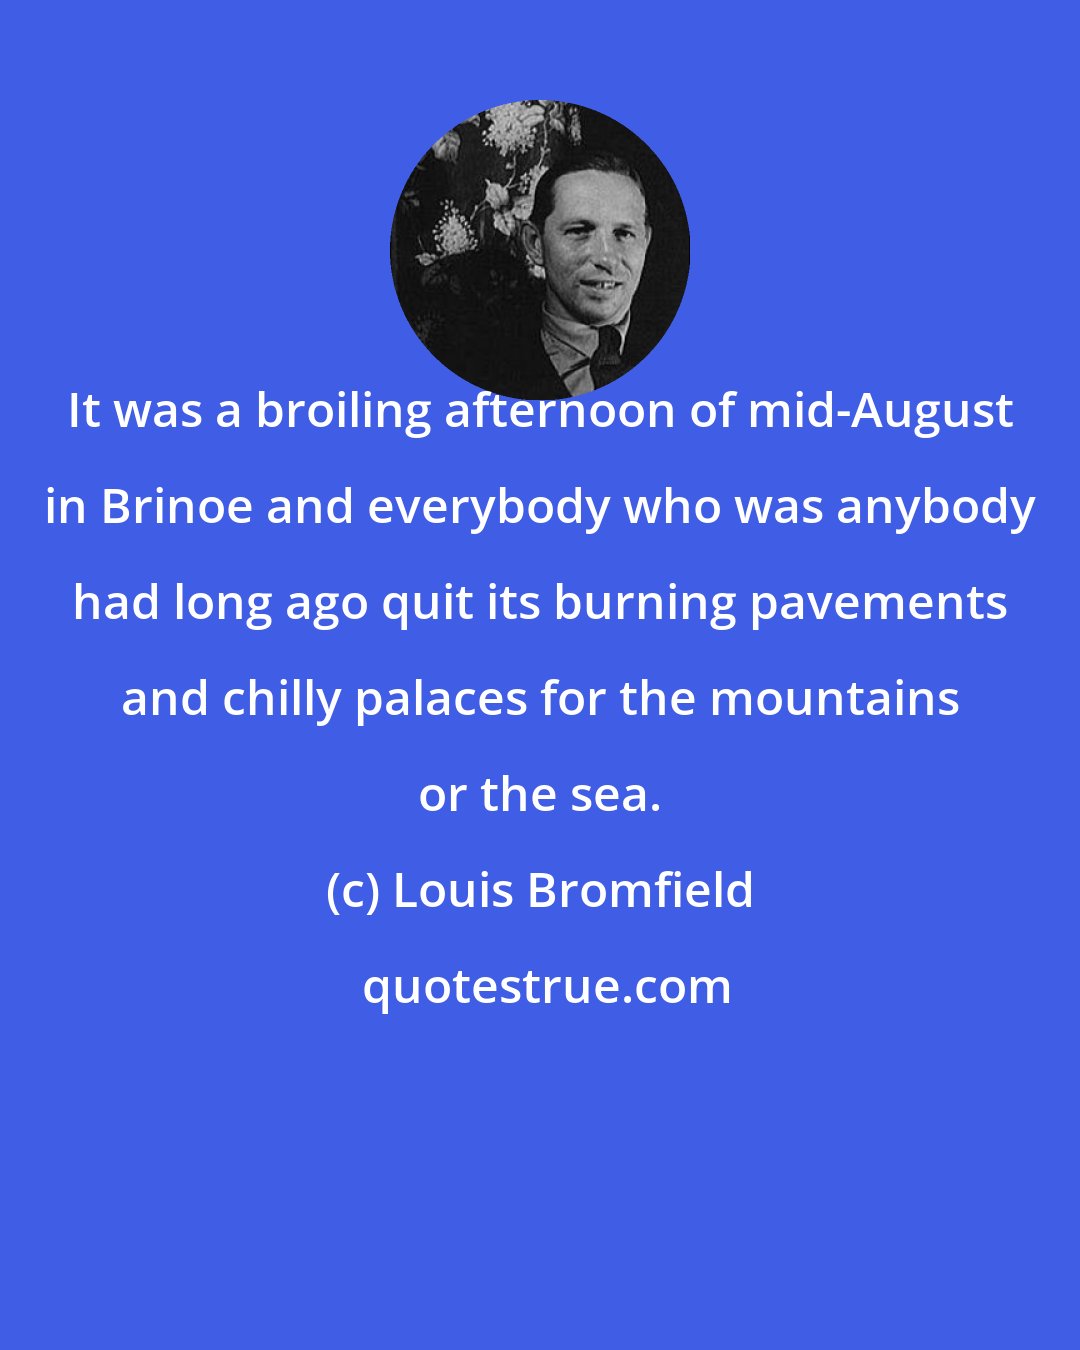 Louis Bromfield: It was a broiling afternoon of mid-August in Brinoe and everybody who was anybody had long ago quit its burning pavements and chilly palaces for the mountains or the sea.